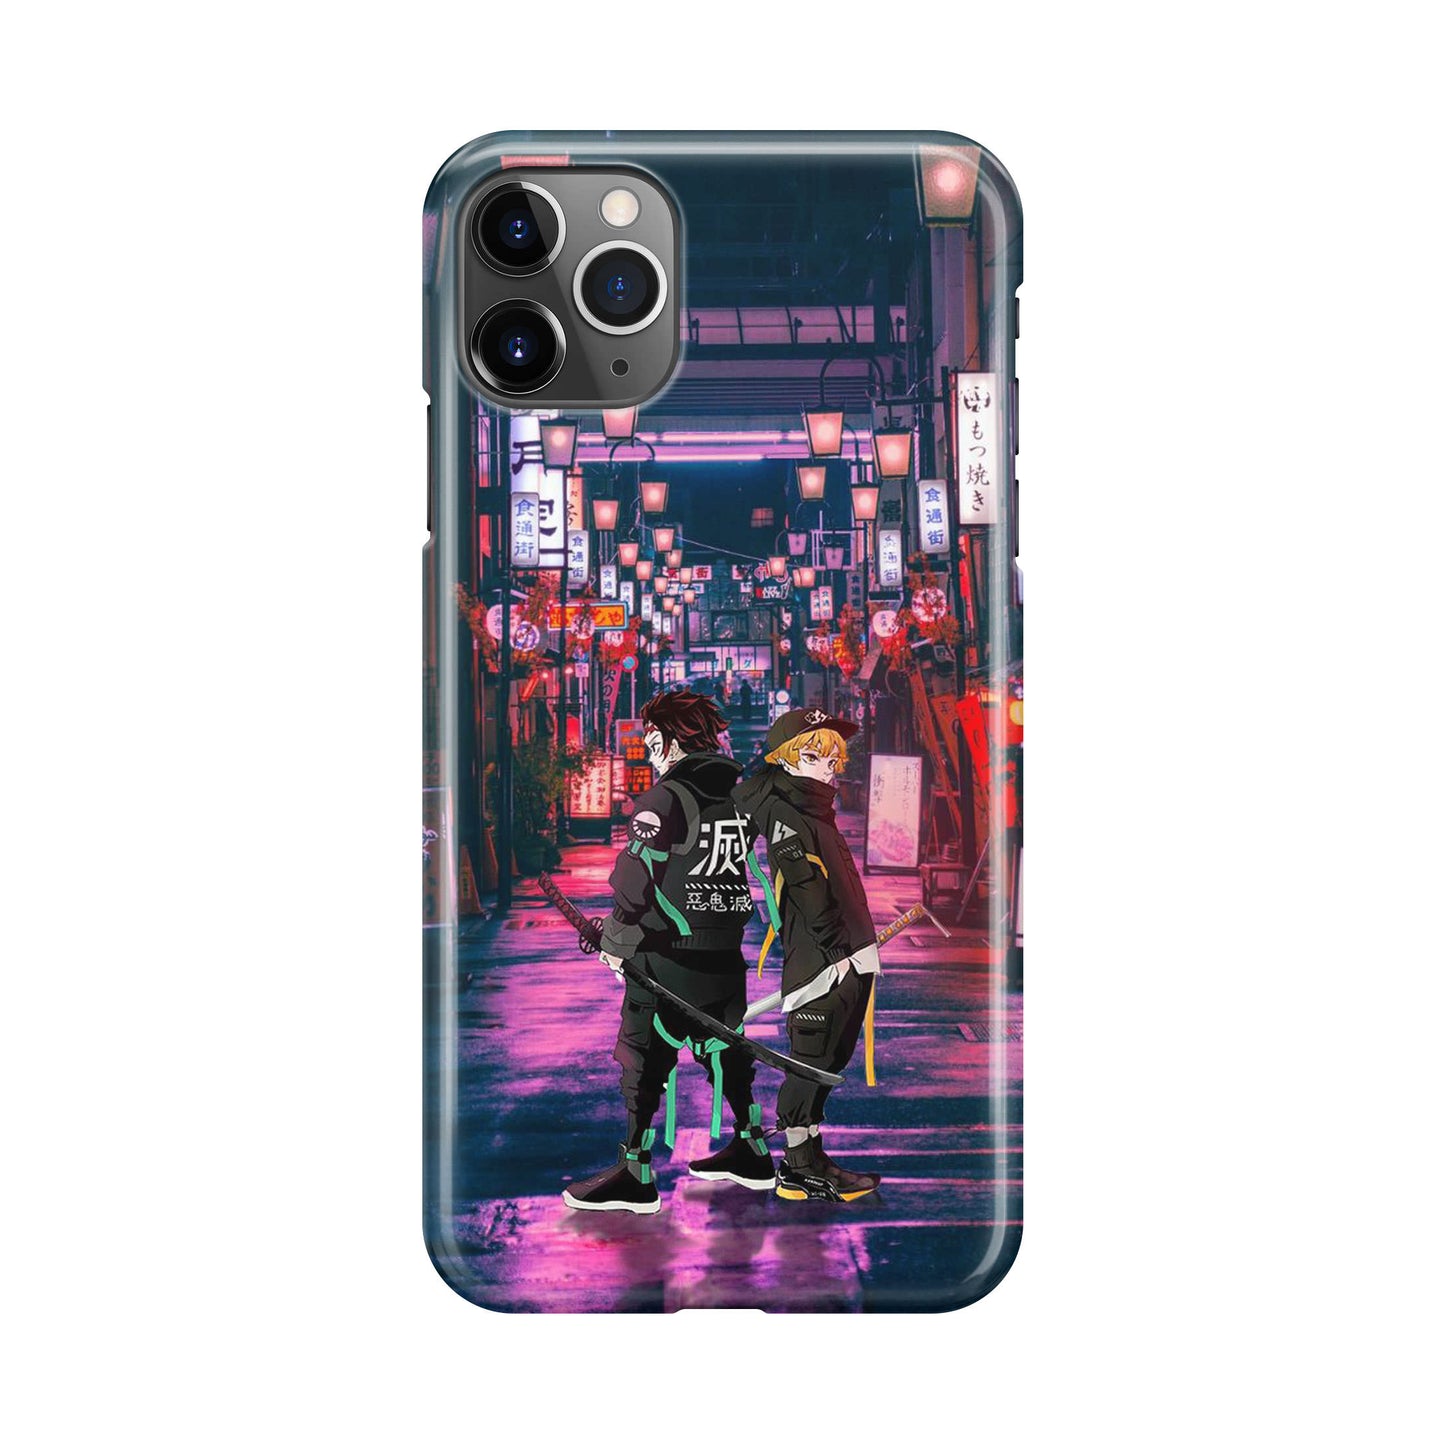 Tanjir0 And Zenittsu in Style iPhone 11 Pro Max Case